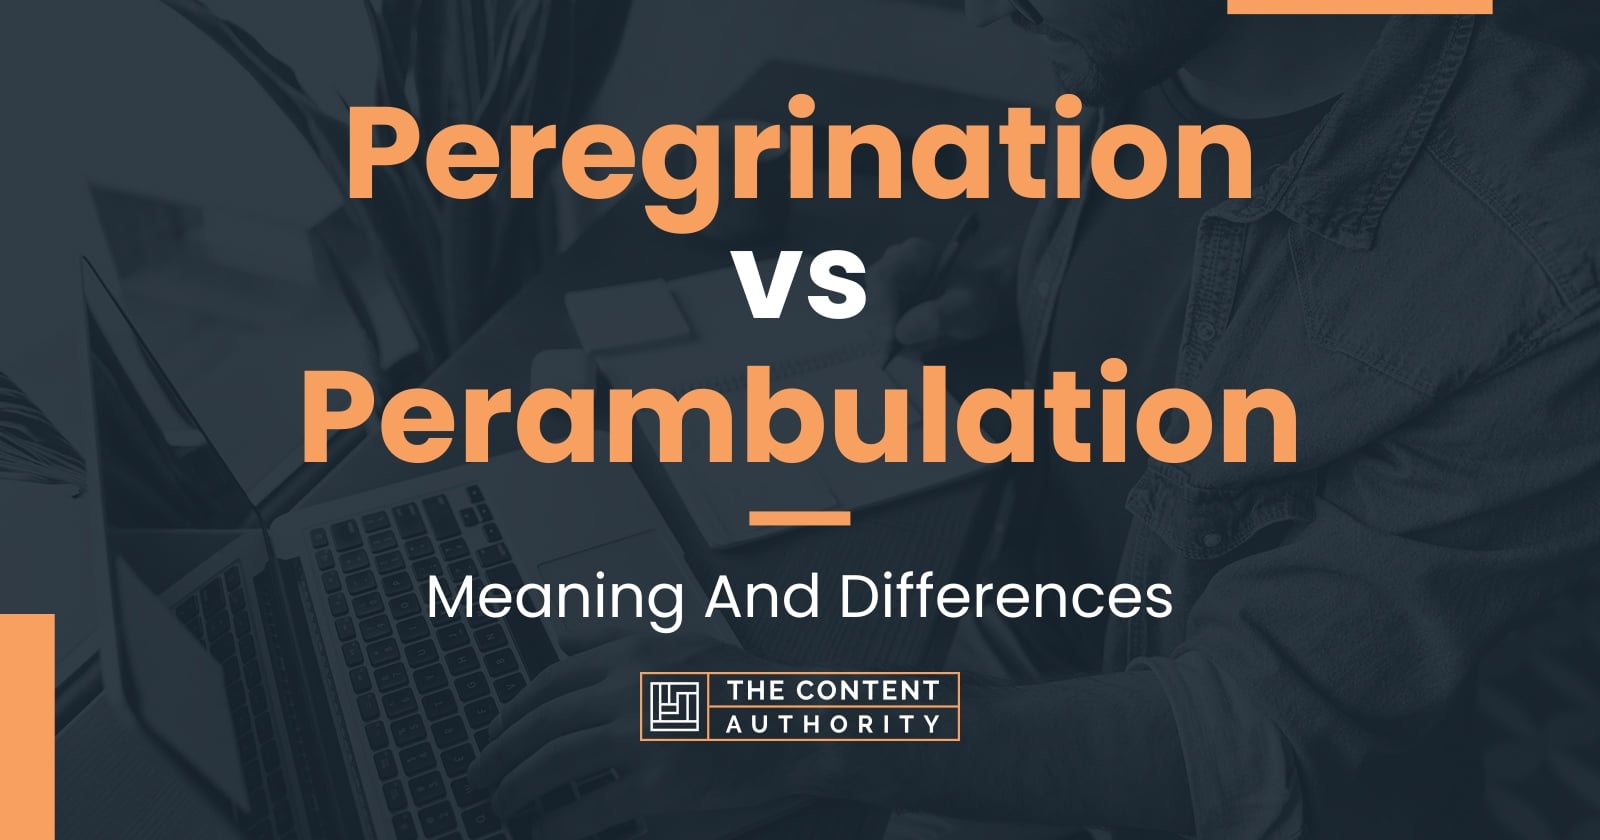 peregrination verb meaning